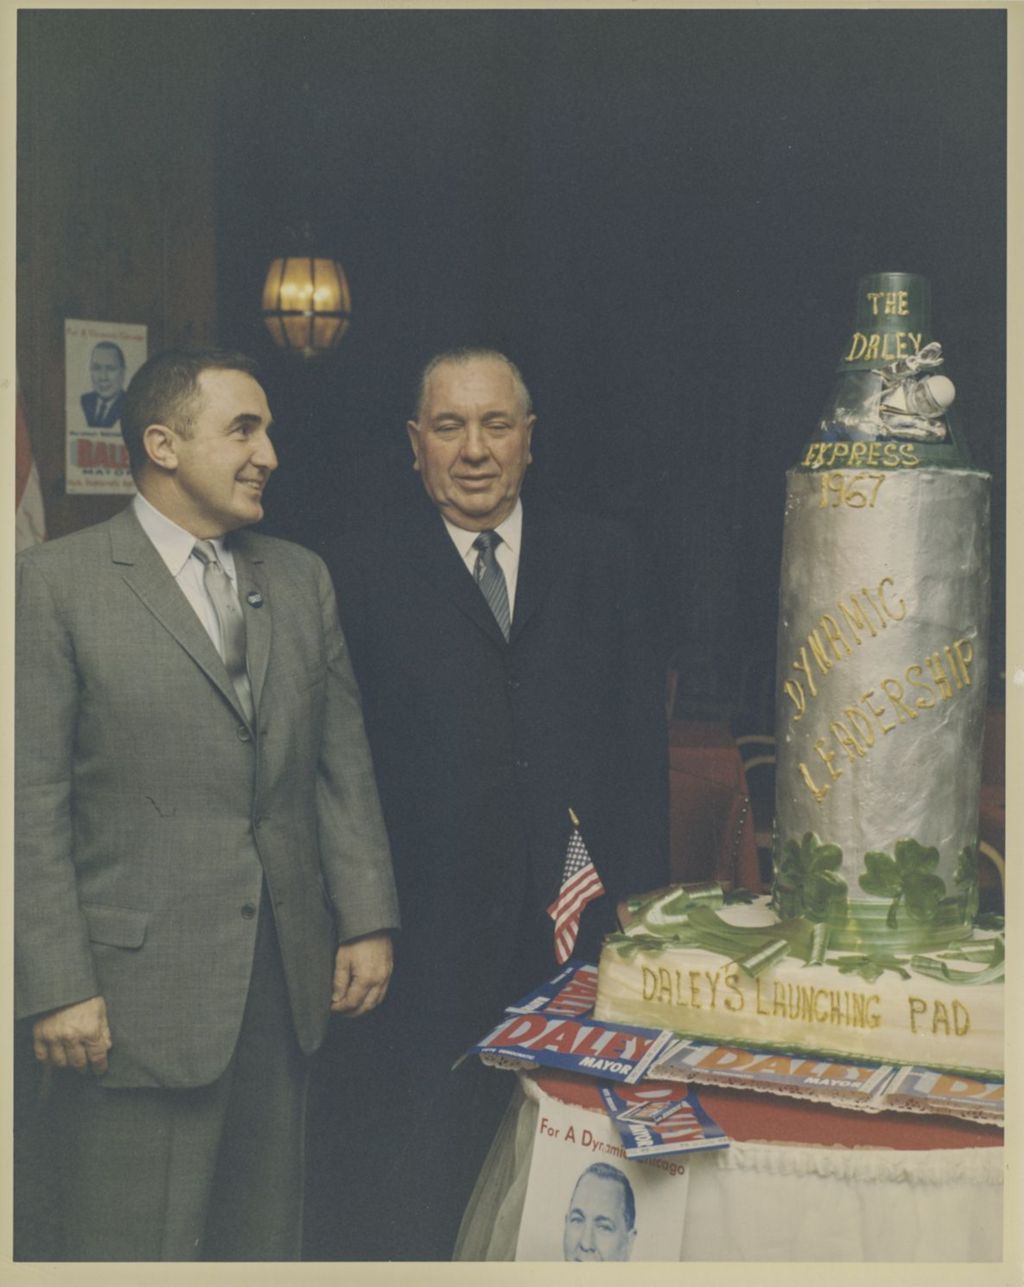 Miniature of Richard J. Daley next to the Daley Express campaign cake